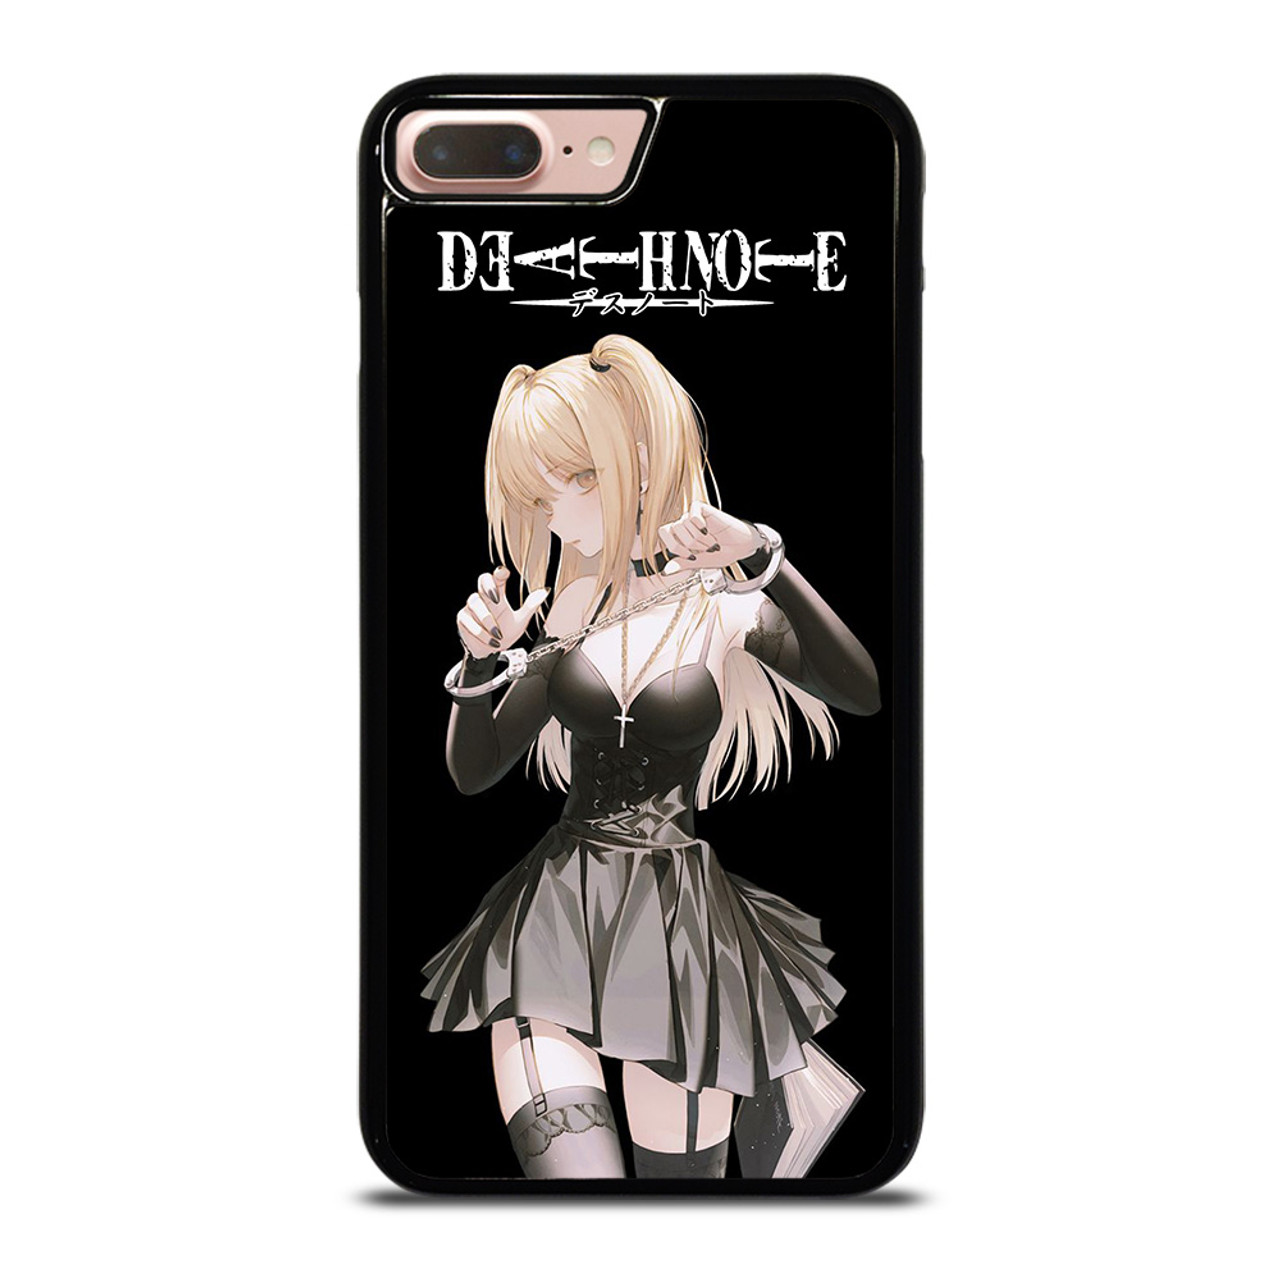 ZERO TWO CUTE DARLING IN FRANXX ANIME iPhone 7 / 8 Plus Case Cover